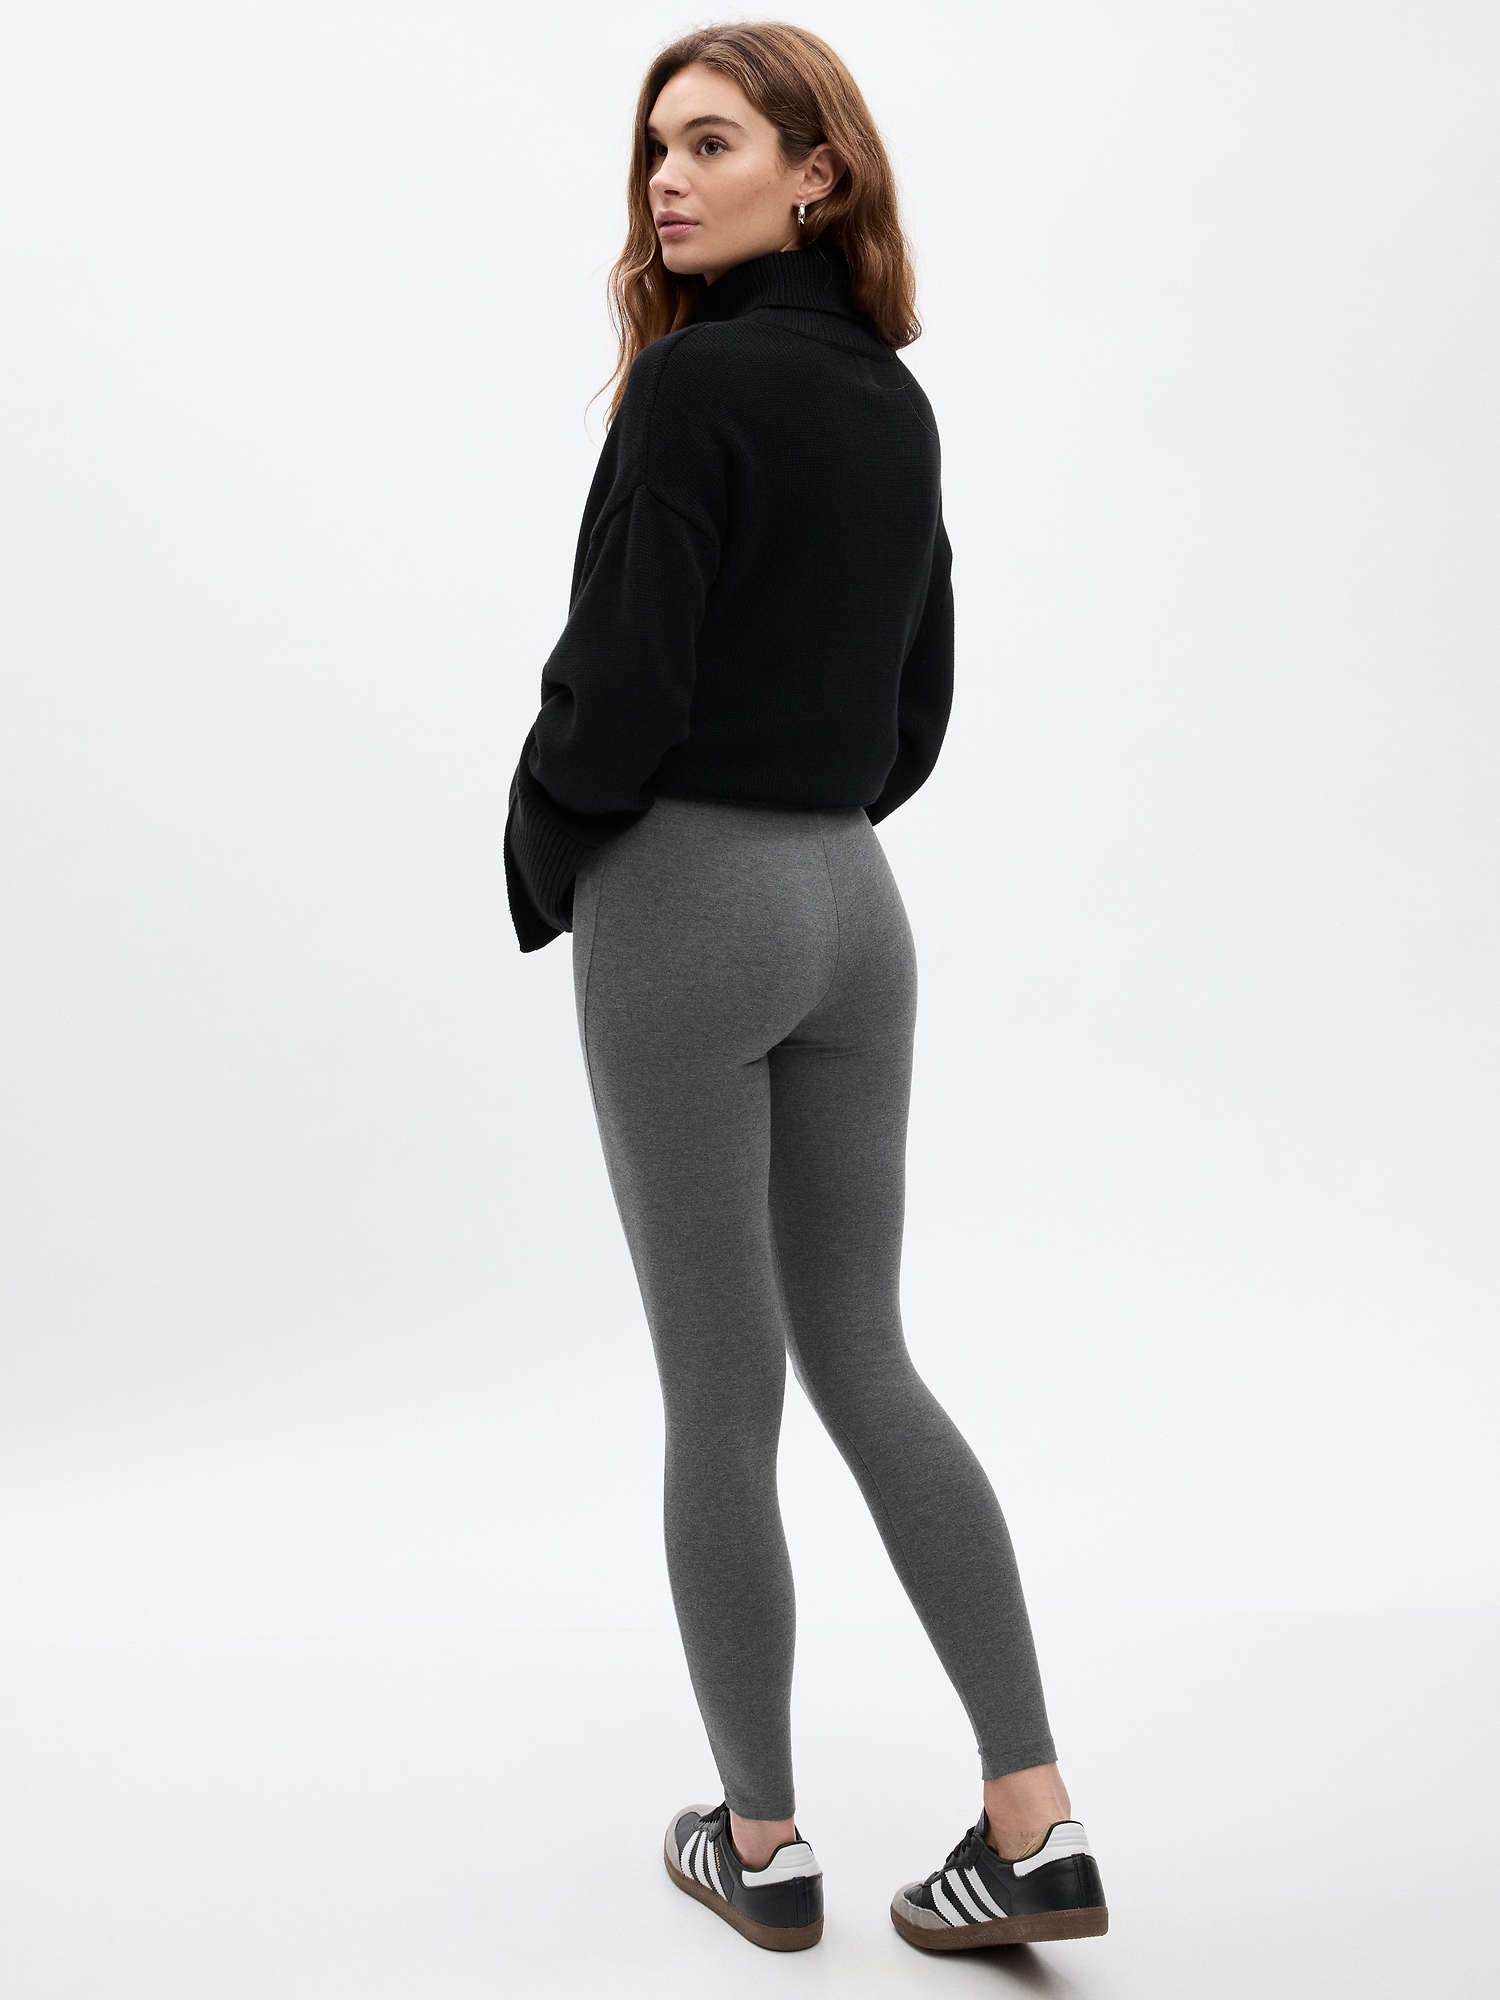 Shop looks for「Crew Neck Long Sleeve Sweatshirt、Extra Stretch Leggings Pants」|  UNIQLO IN